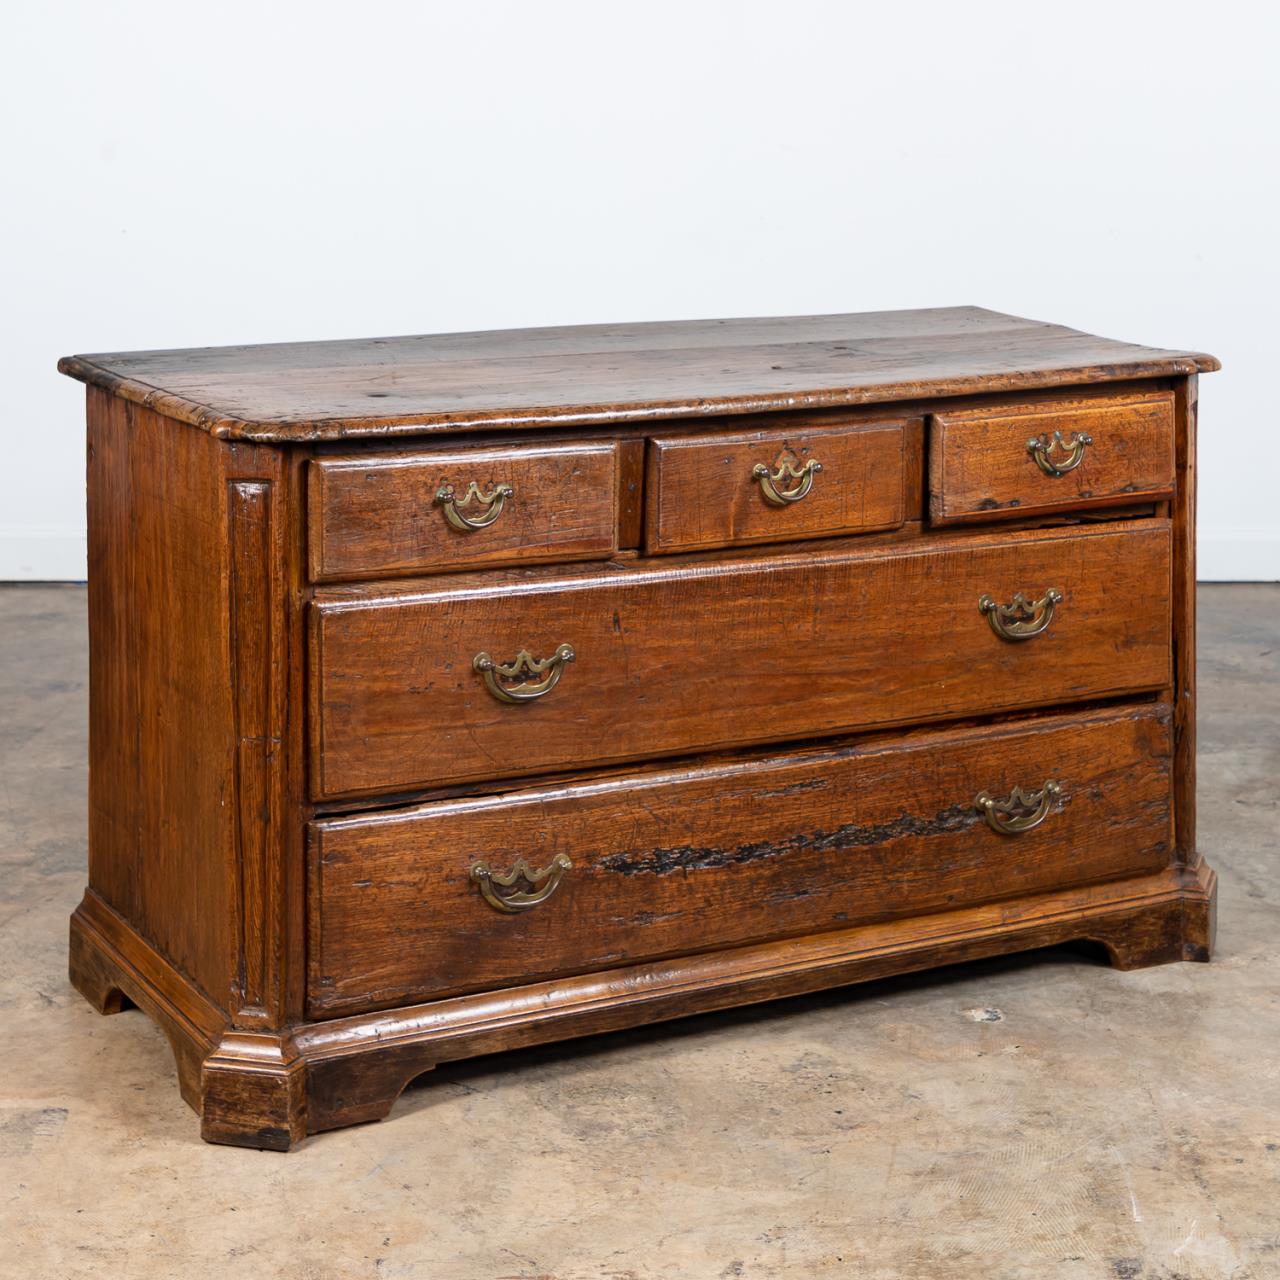 18TH C CONTINENTAL BAROQUE FIVE DRAWER 35d702